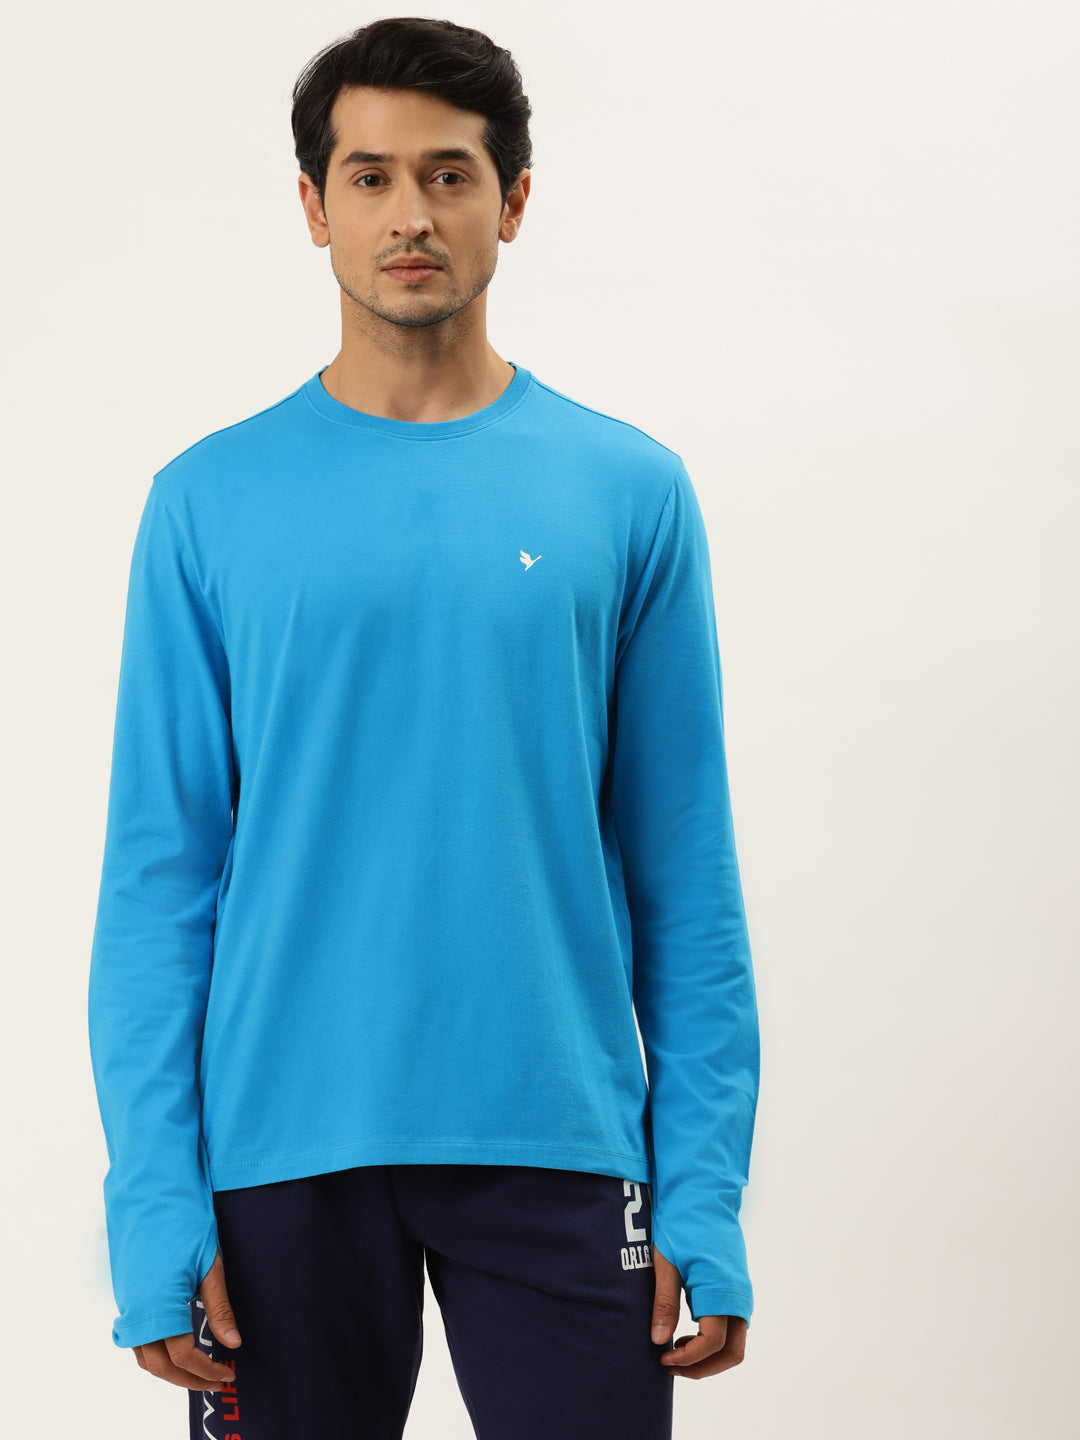 MENS COTTON RICH LYCRA SOLID FULL SLEEVE CREW NECK T-SHIRTS